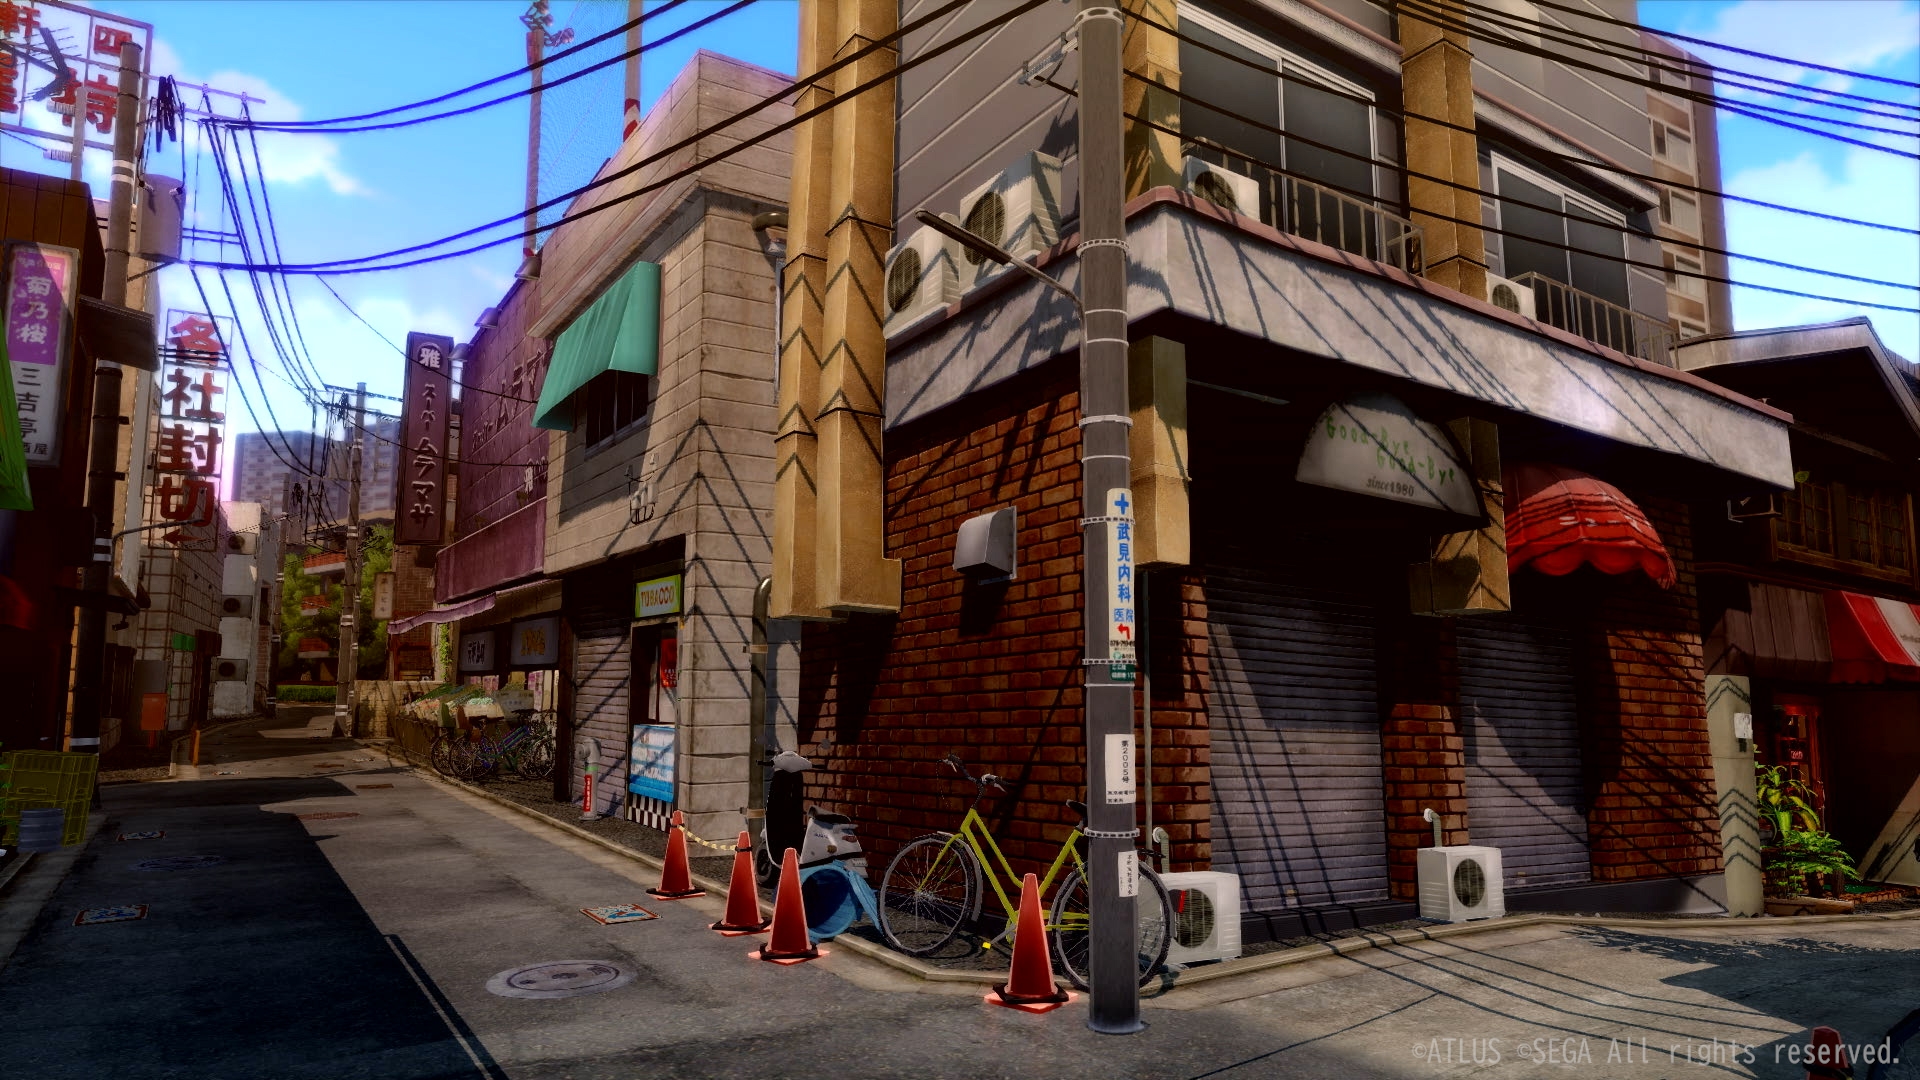 Persona Central Atlus Has Posted Four Virtual Backgrounds From Persona 5 Royal Being Offered For Video Conferences And Telework From Home Featuring The Cafe From The Outside The Cafe From